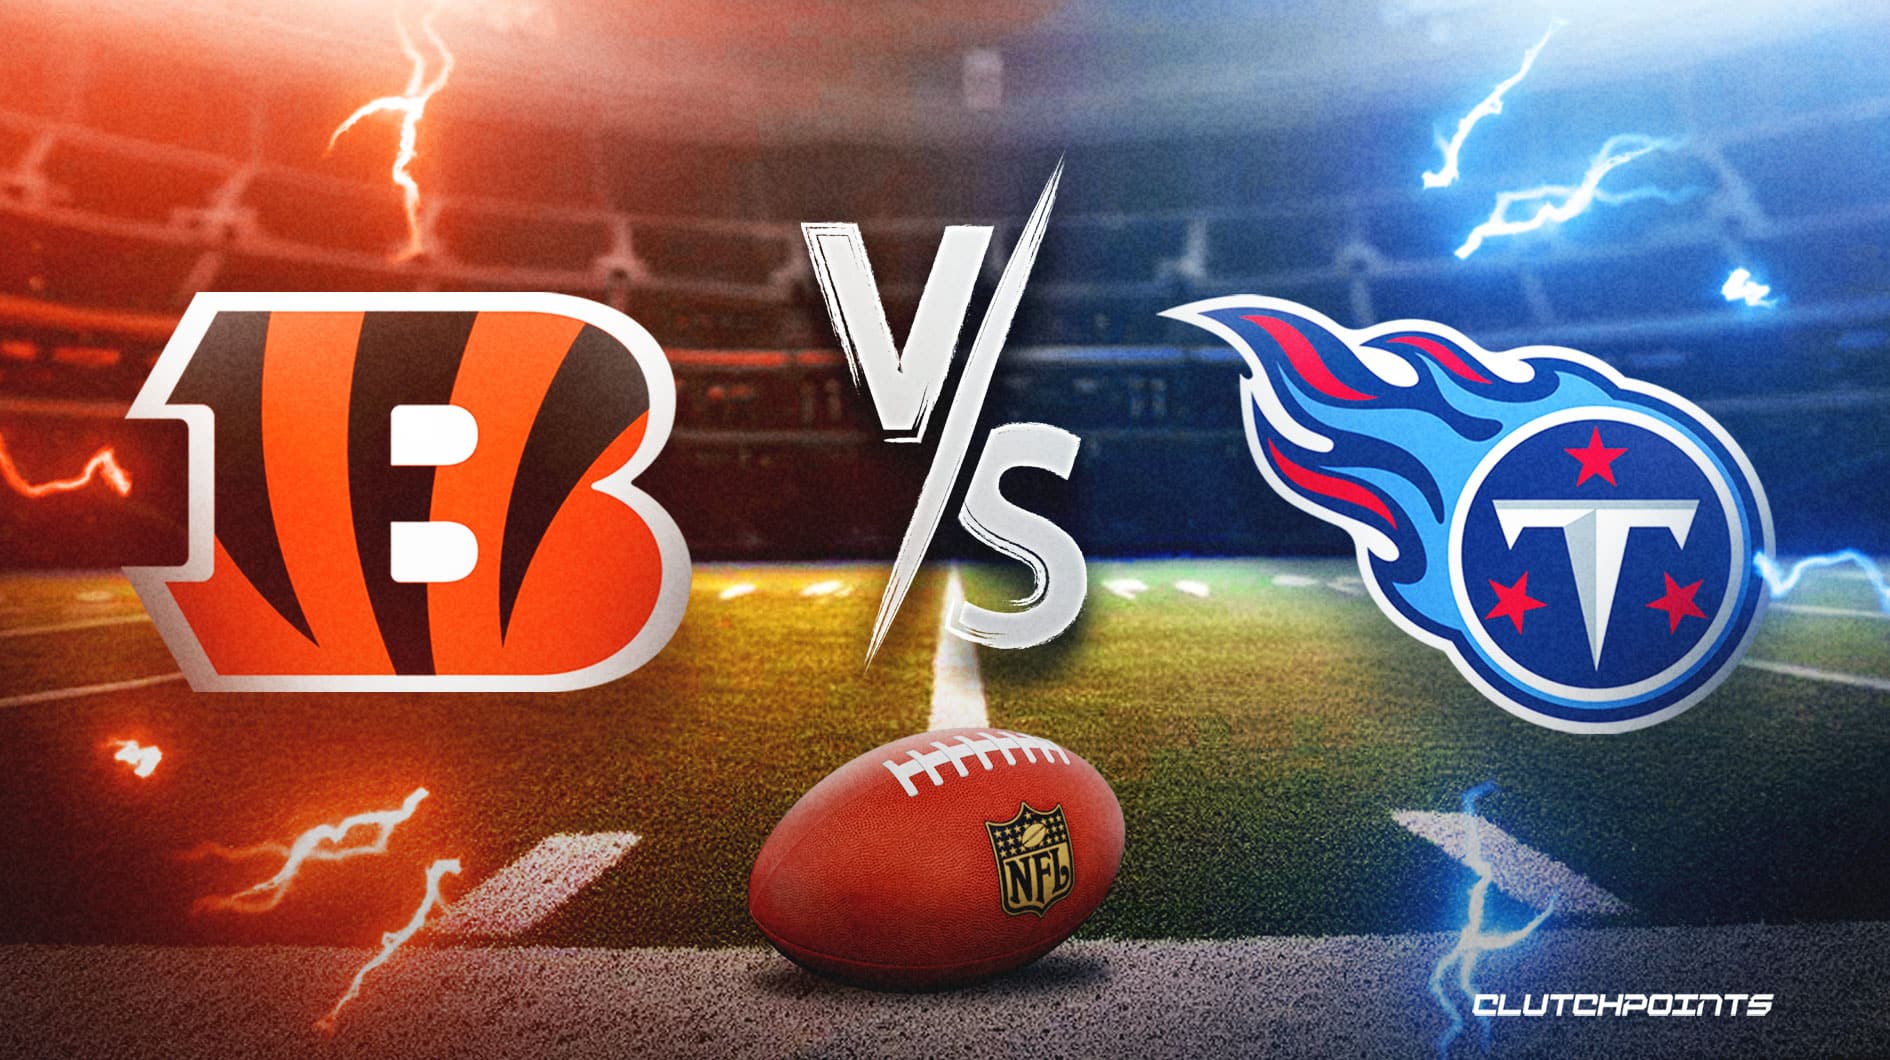 titans and bengals odds